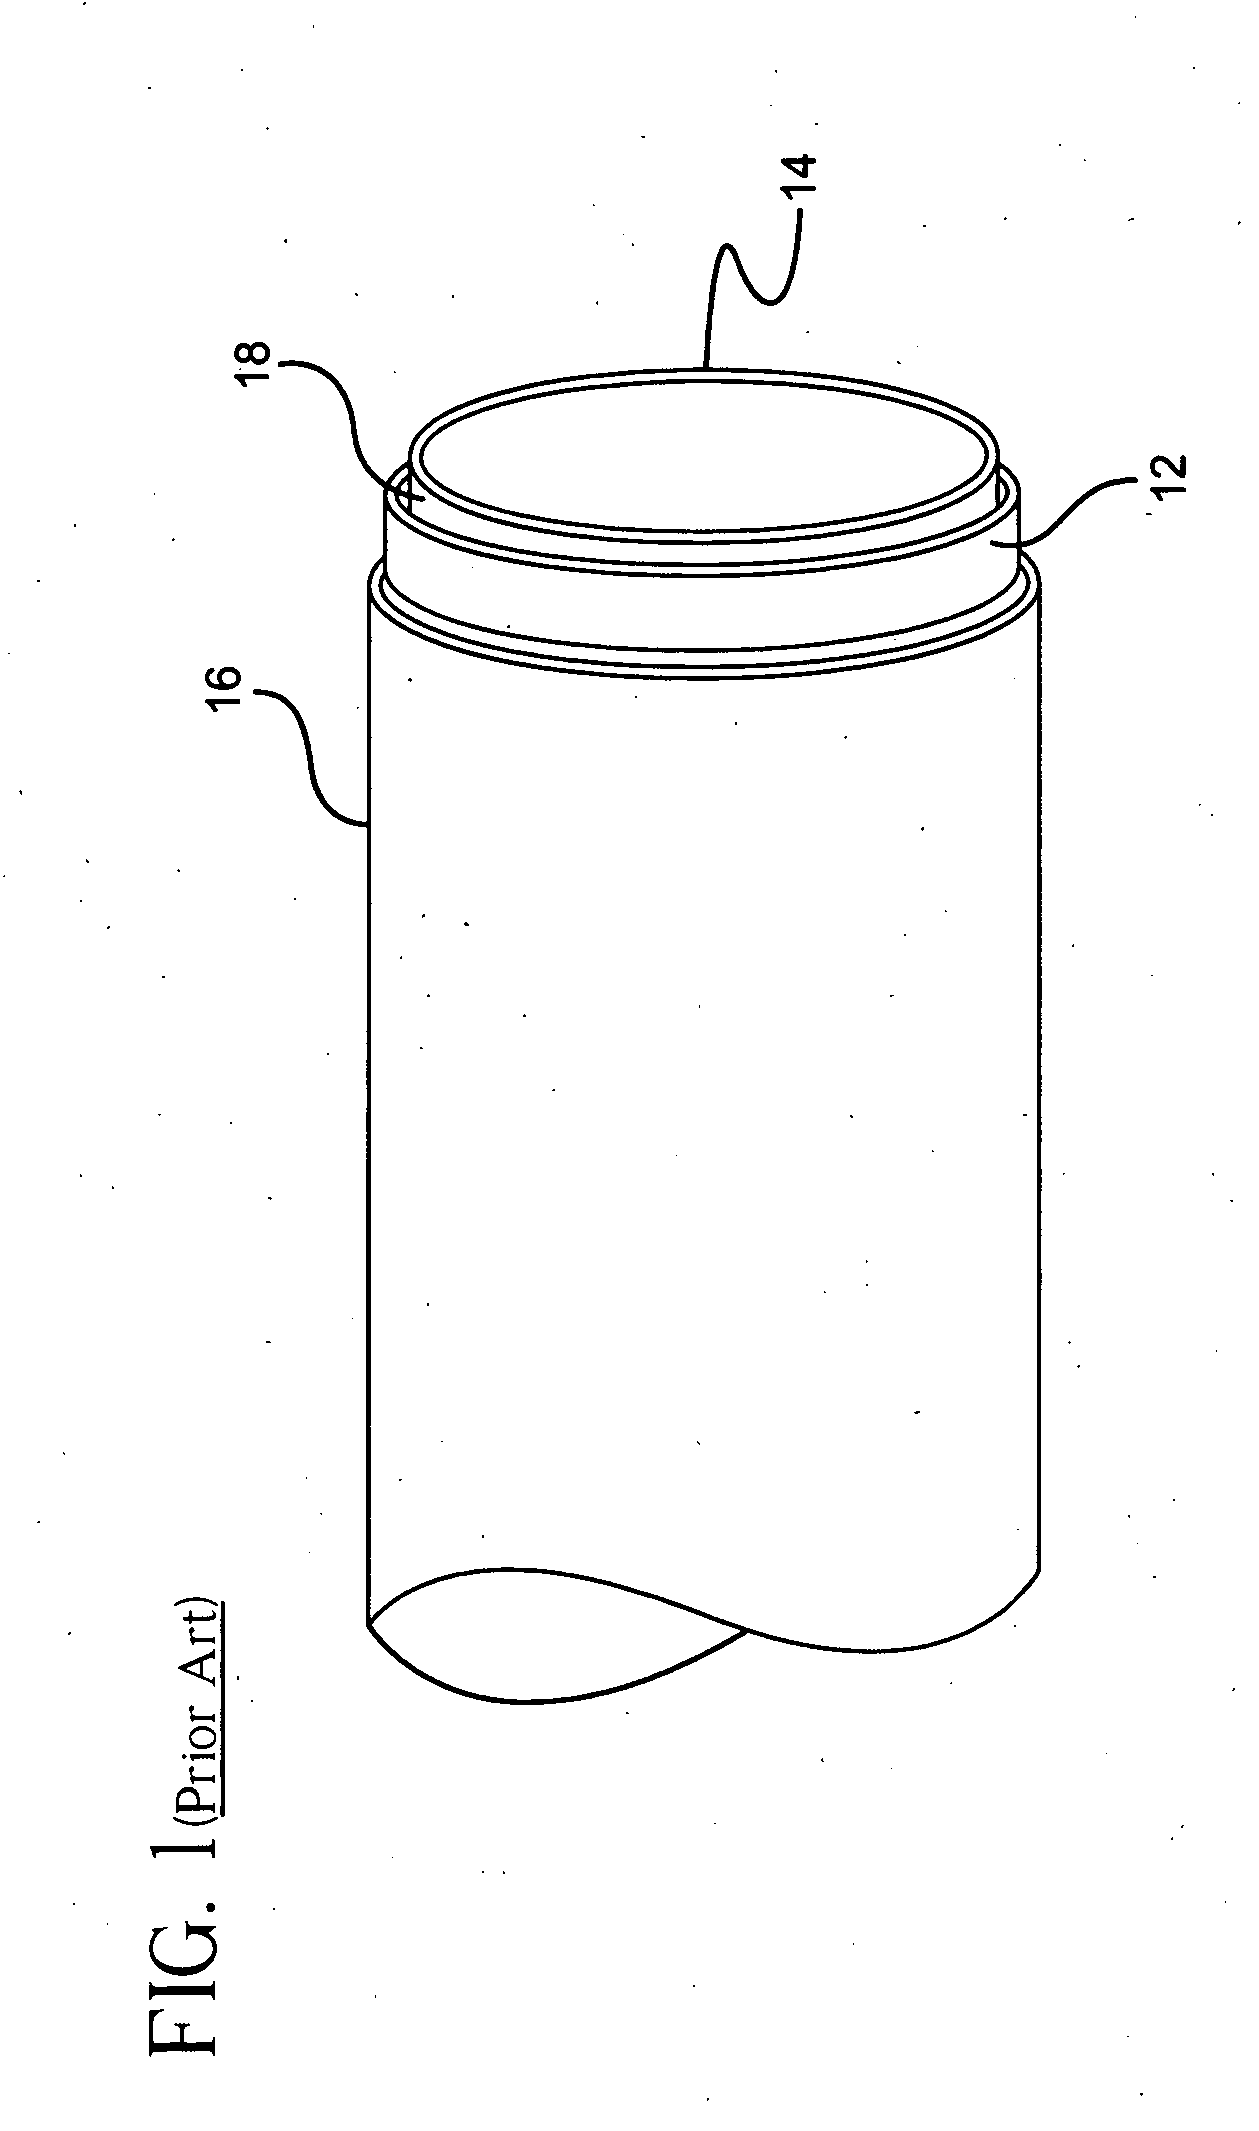 Anti-coring device for a surgical morcellator